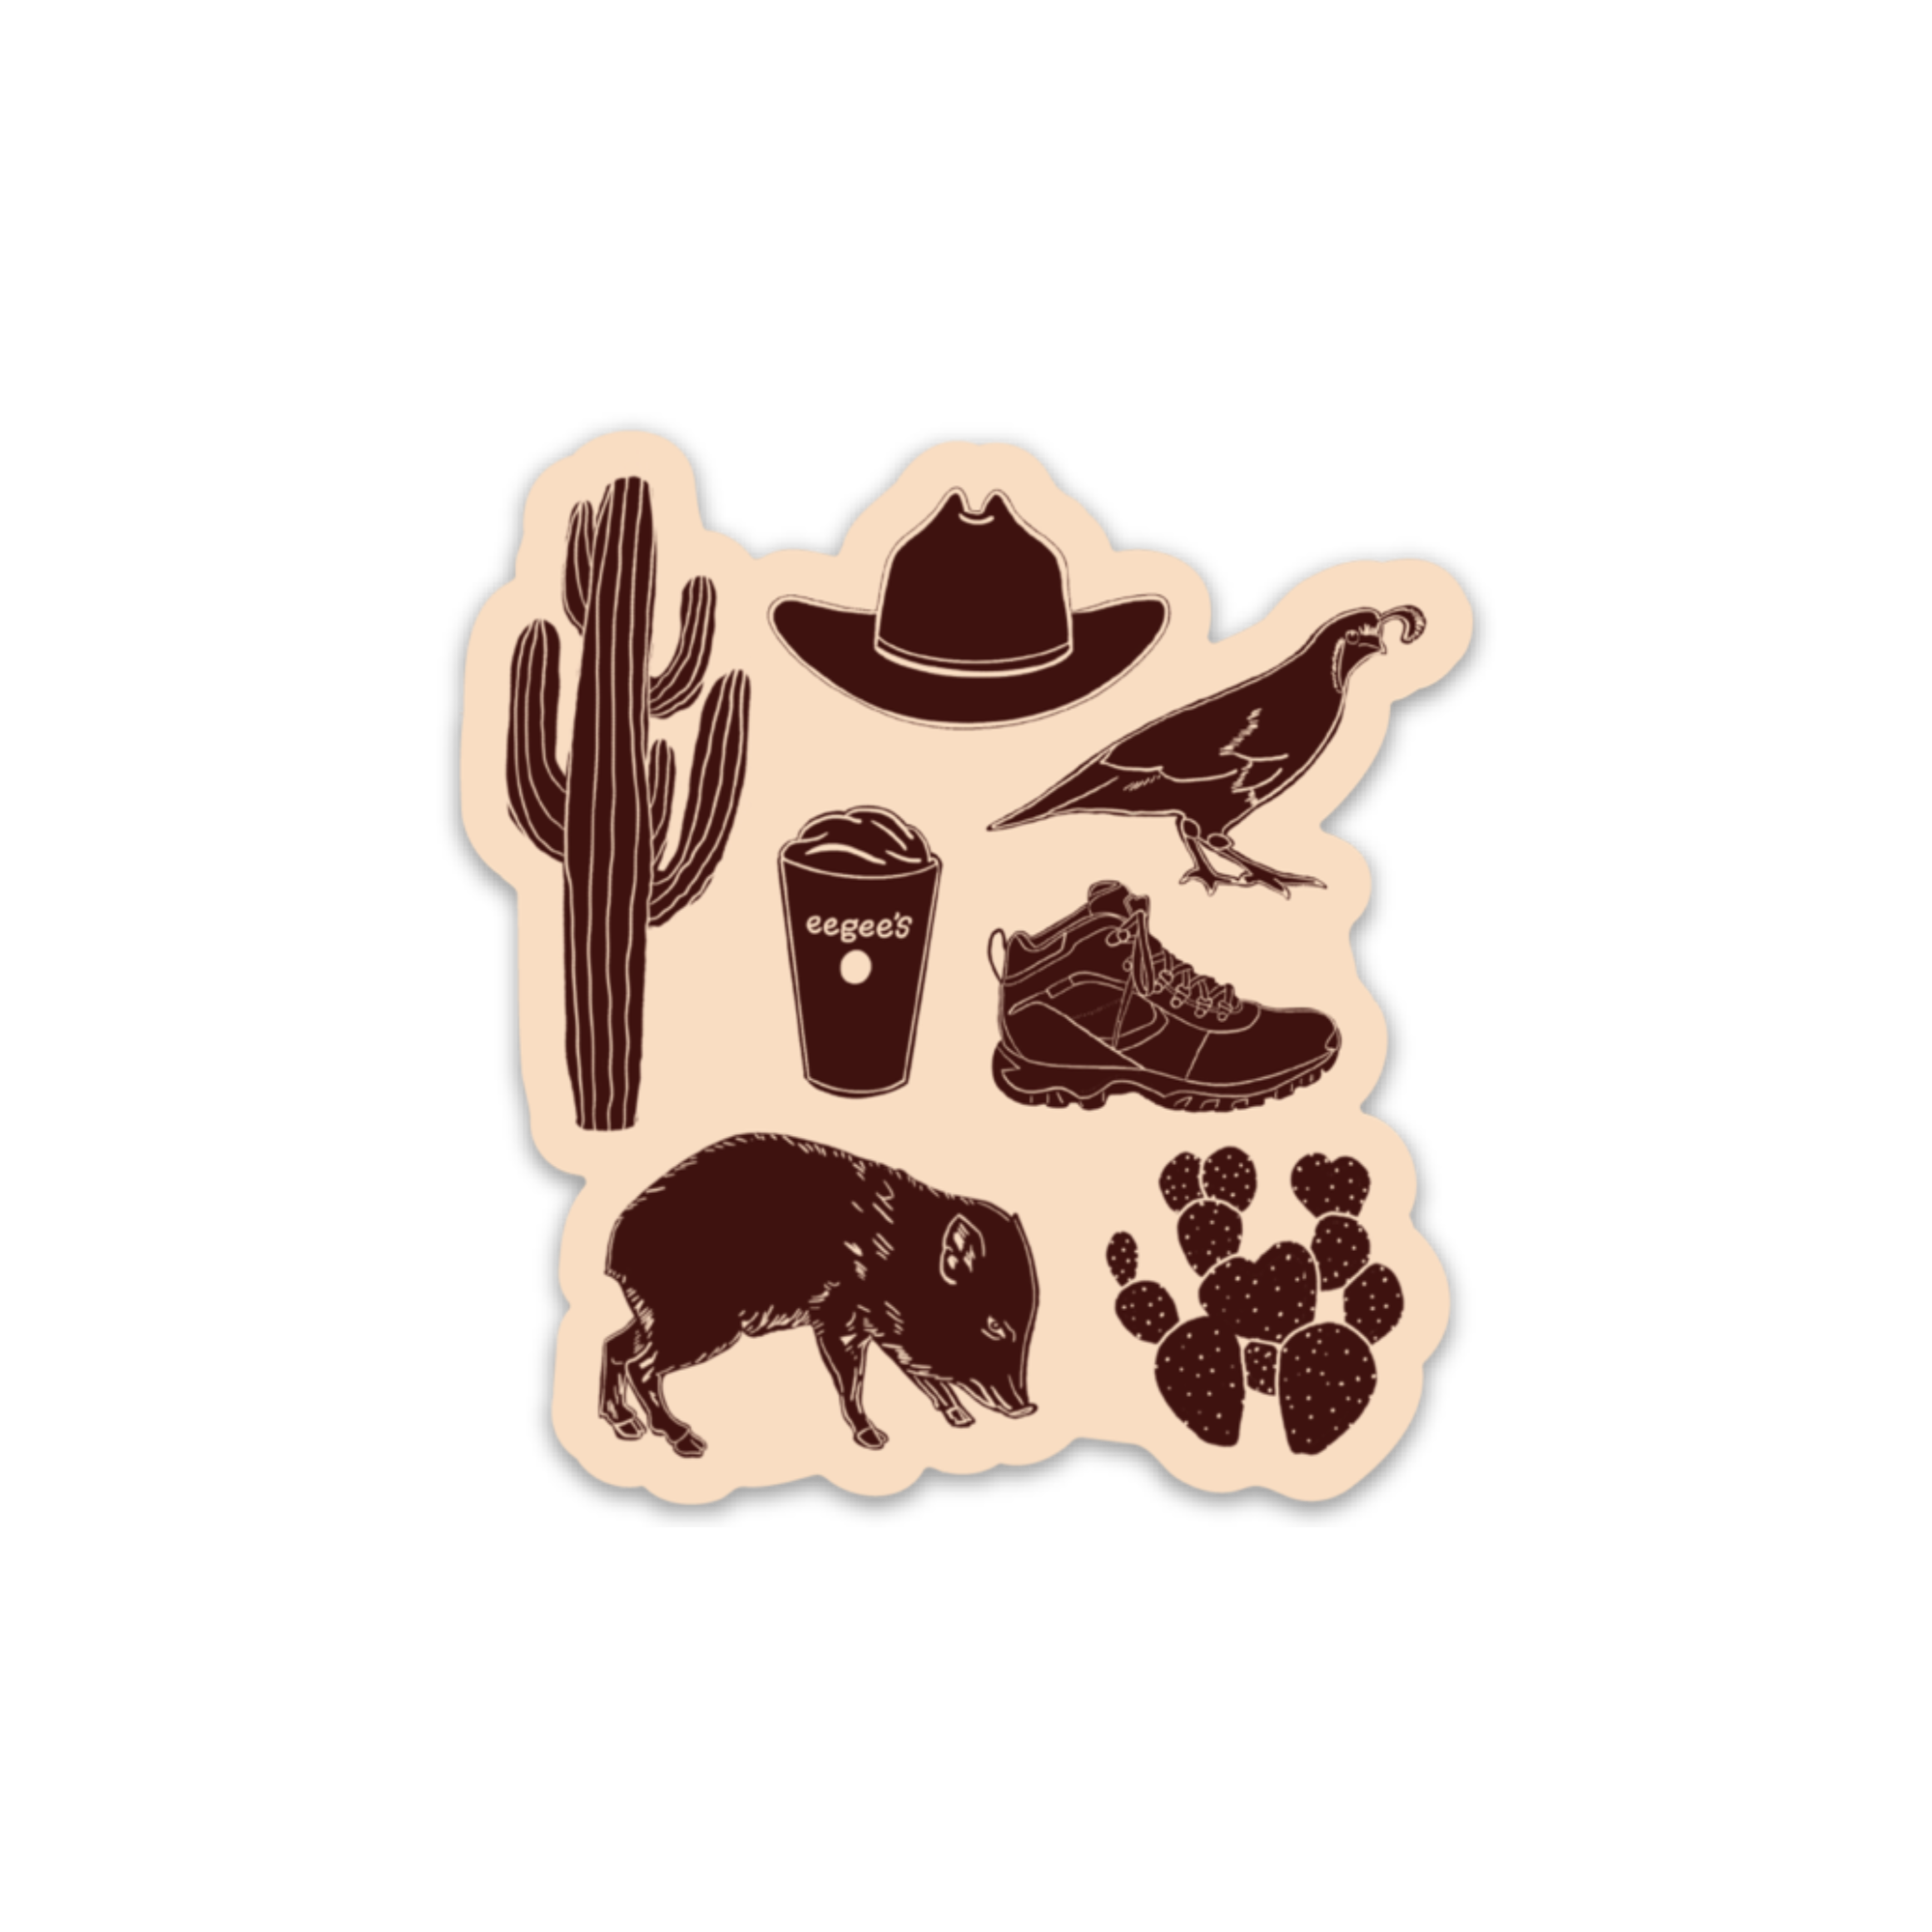 Tan die cut sticker with brown illustrations of a saguaro, hat, quail, eegees, hiking boot, javelina, and prickly pear